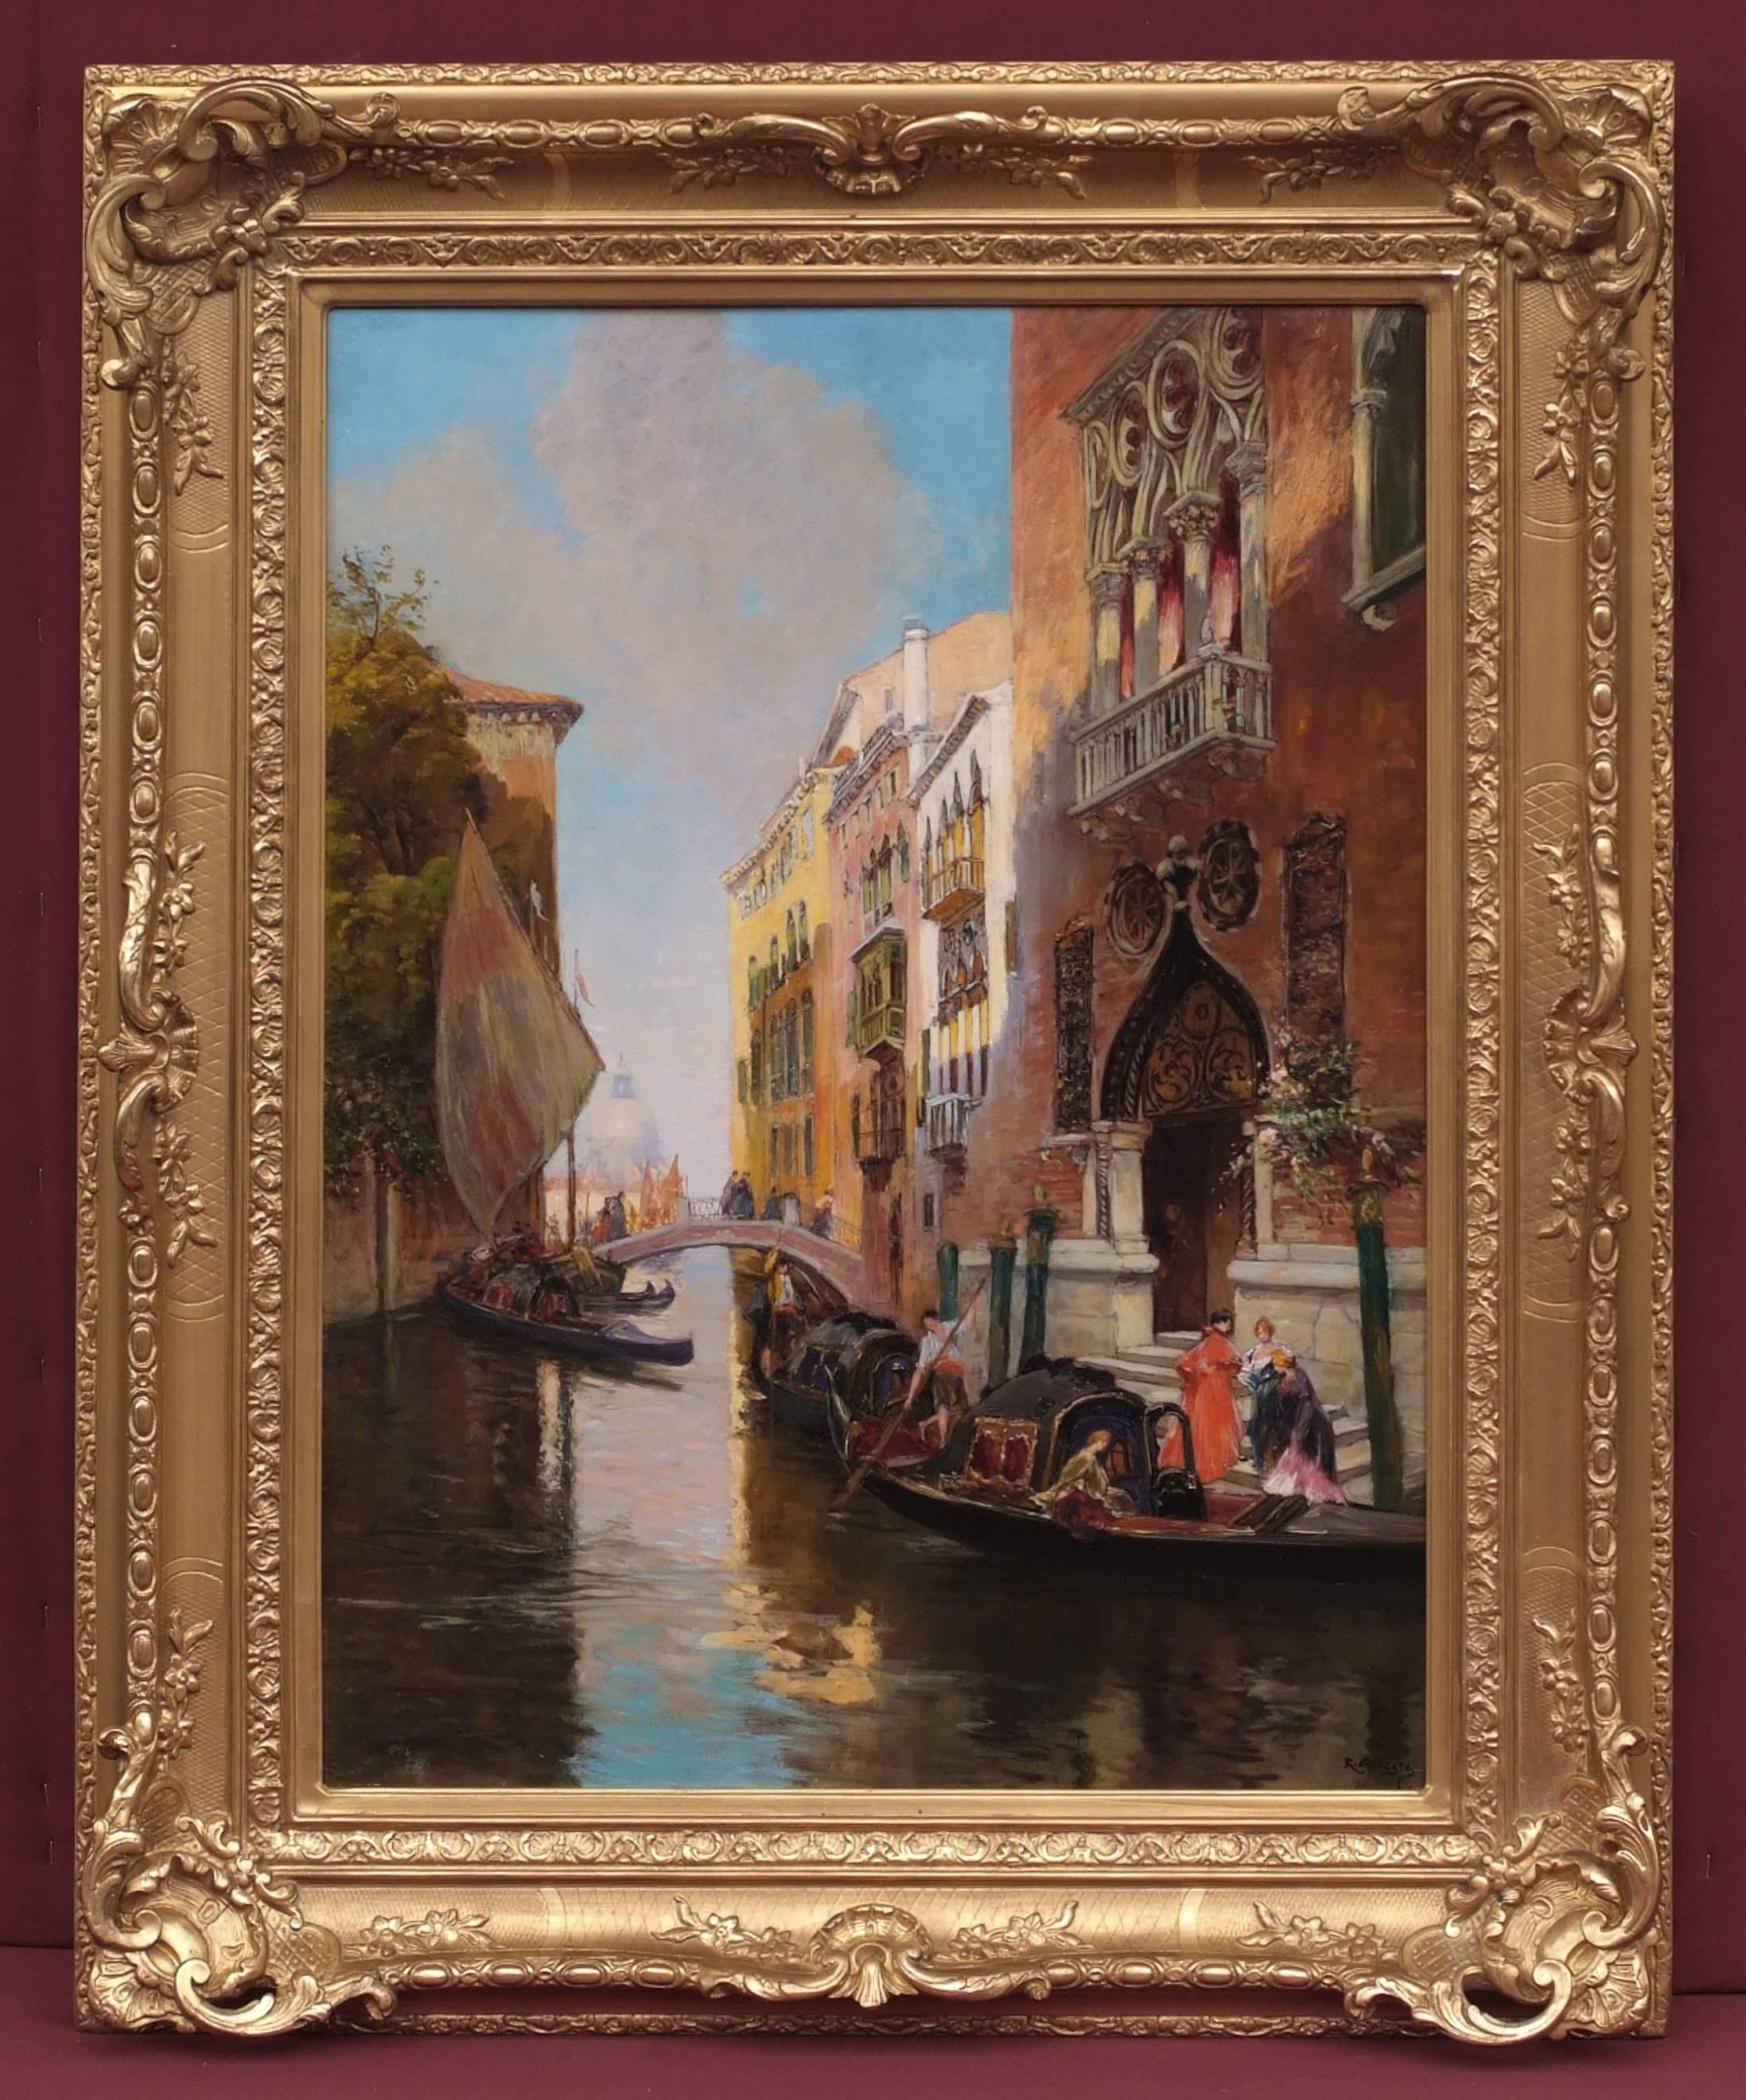 Allegre Raymond Landscape Painting - Painting 19th Century Venice, Canal, Characters